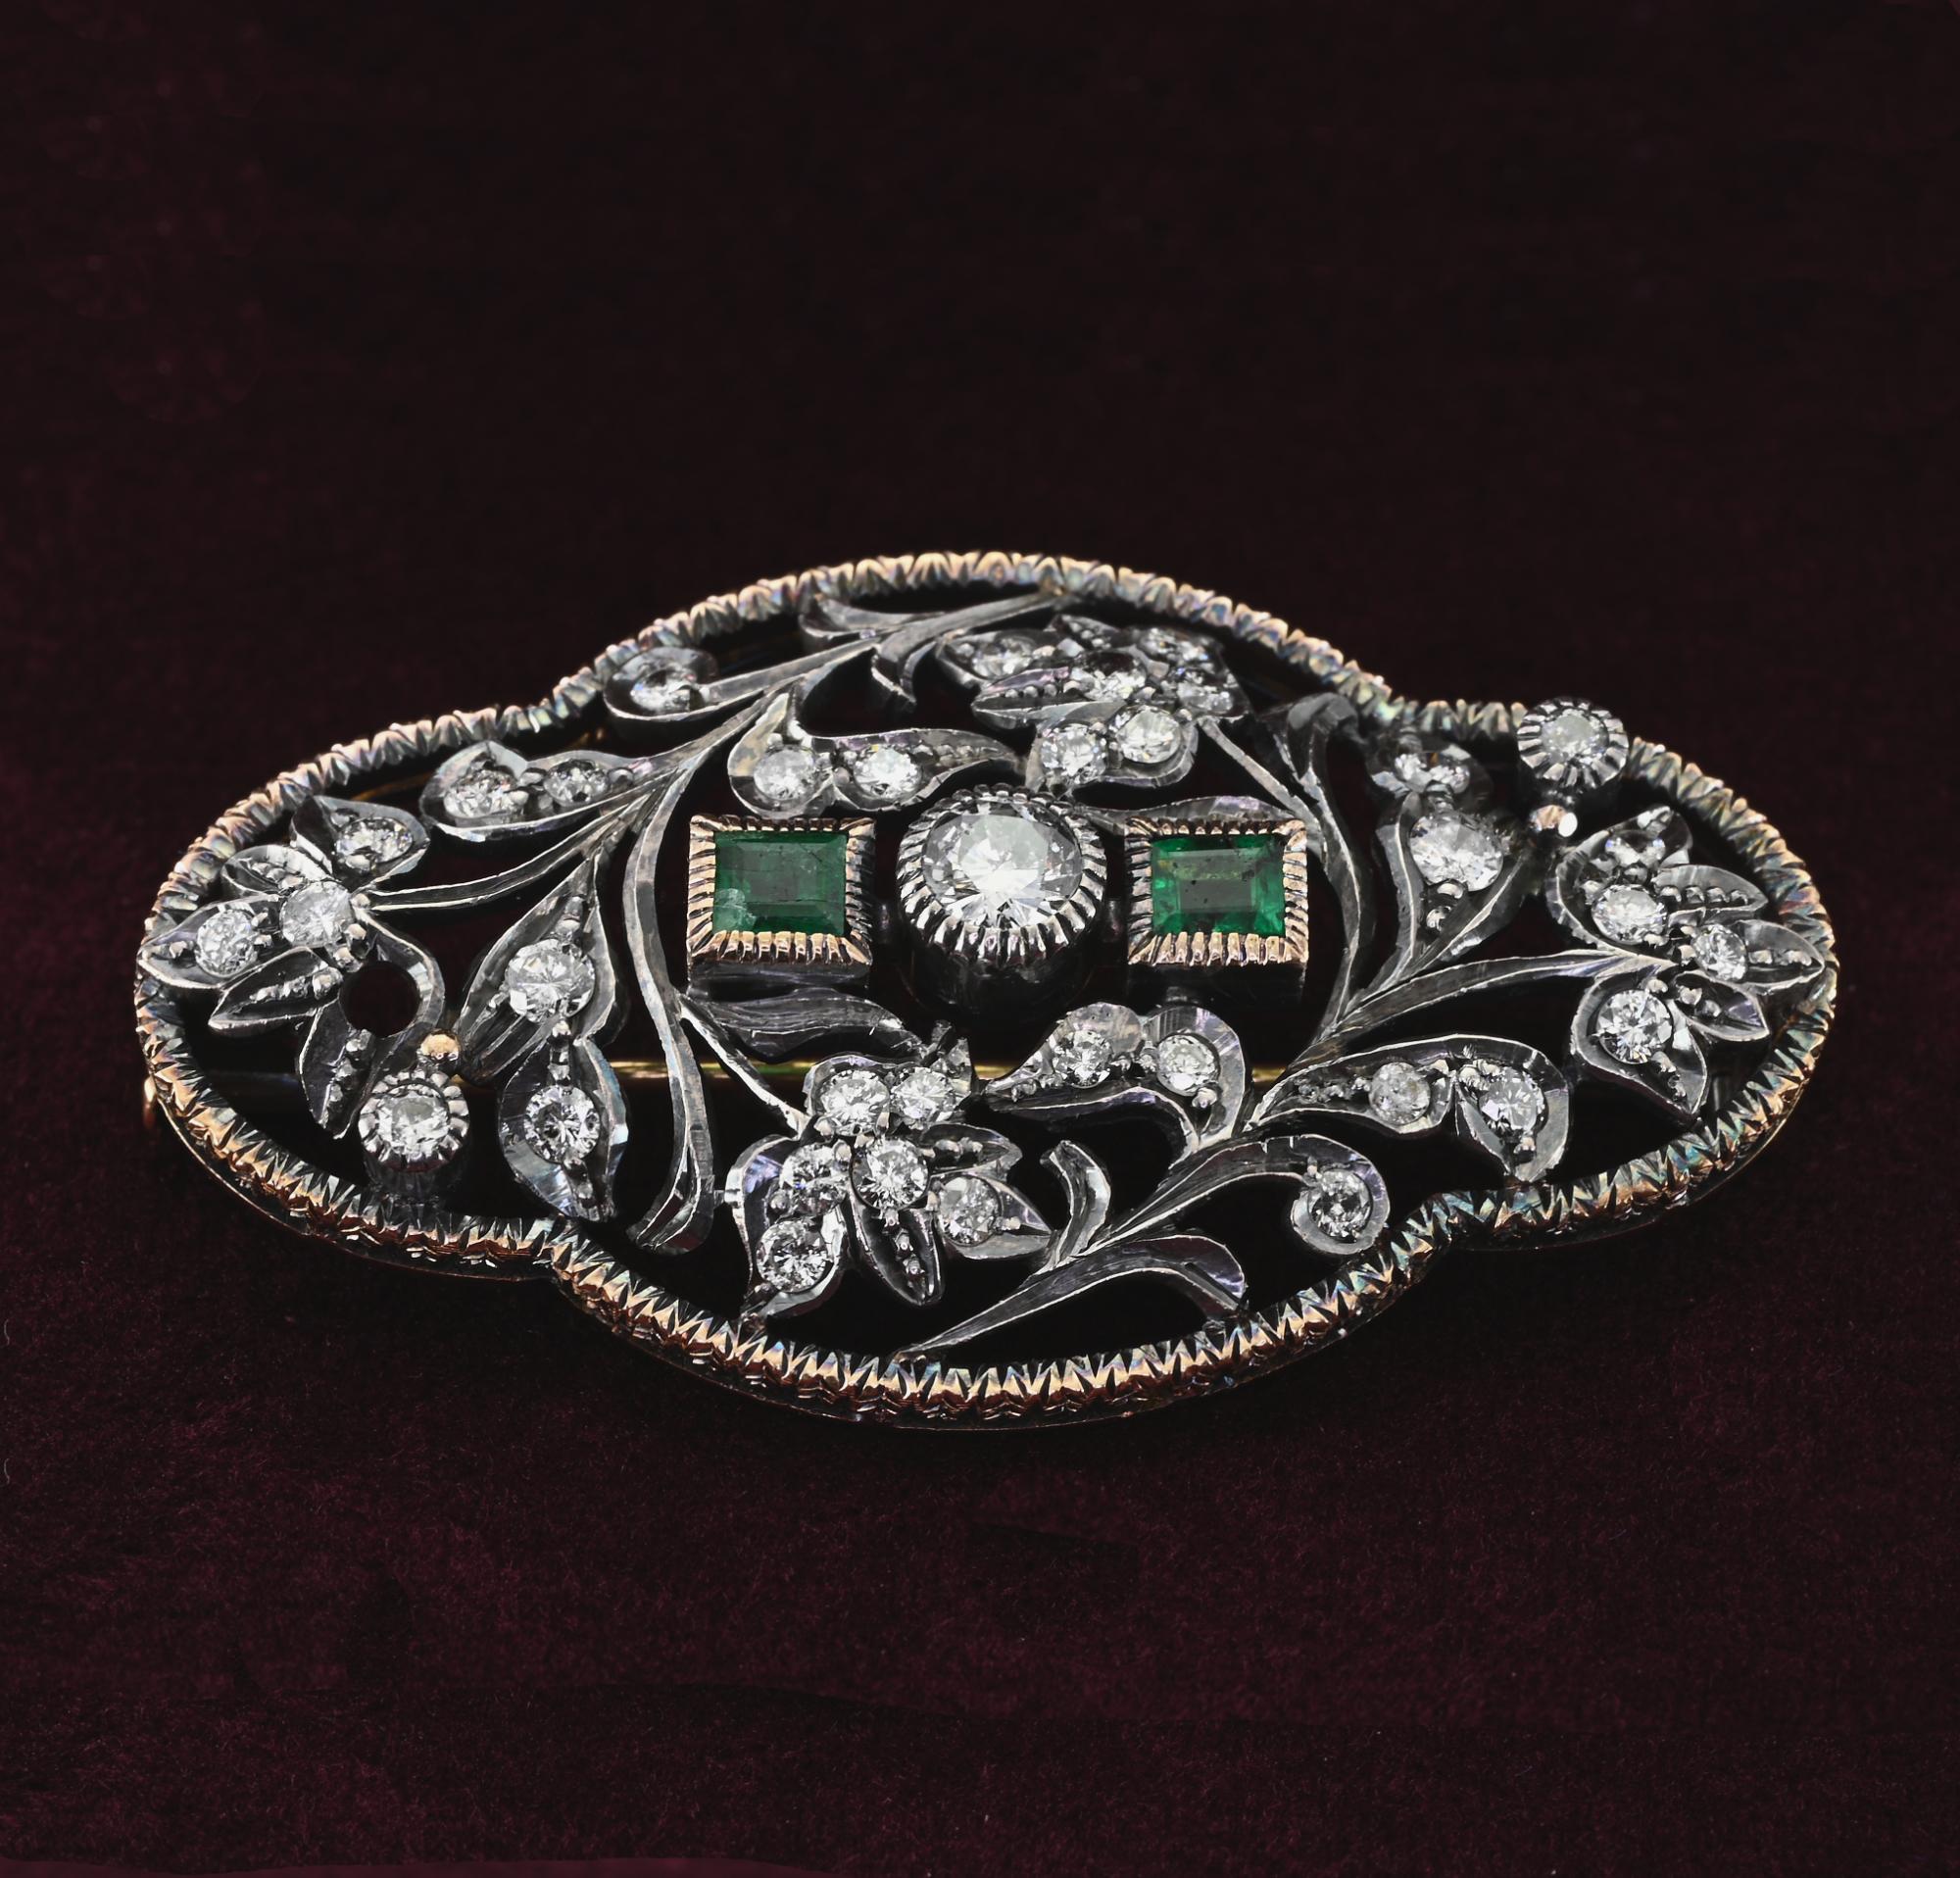 This beautiful Belle Epoque wide brooch is 1910 ca
Skillfully hand crafted of solid 18 Kt gold warm rose color topped by silver
Beautiful past artwork expressed in a large oval plaque wrought with vegetable leaf open work loaded with Diamonds and